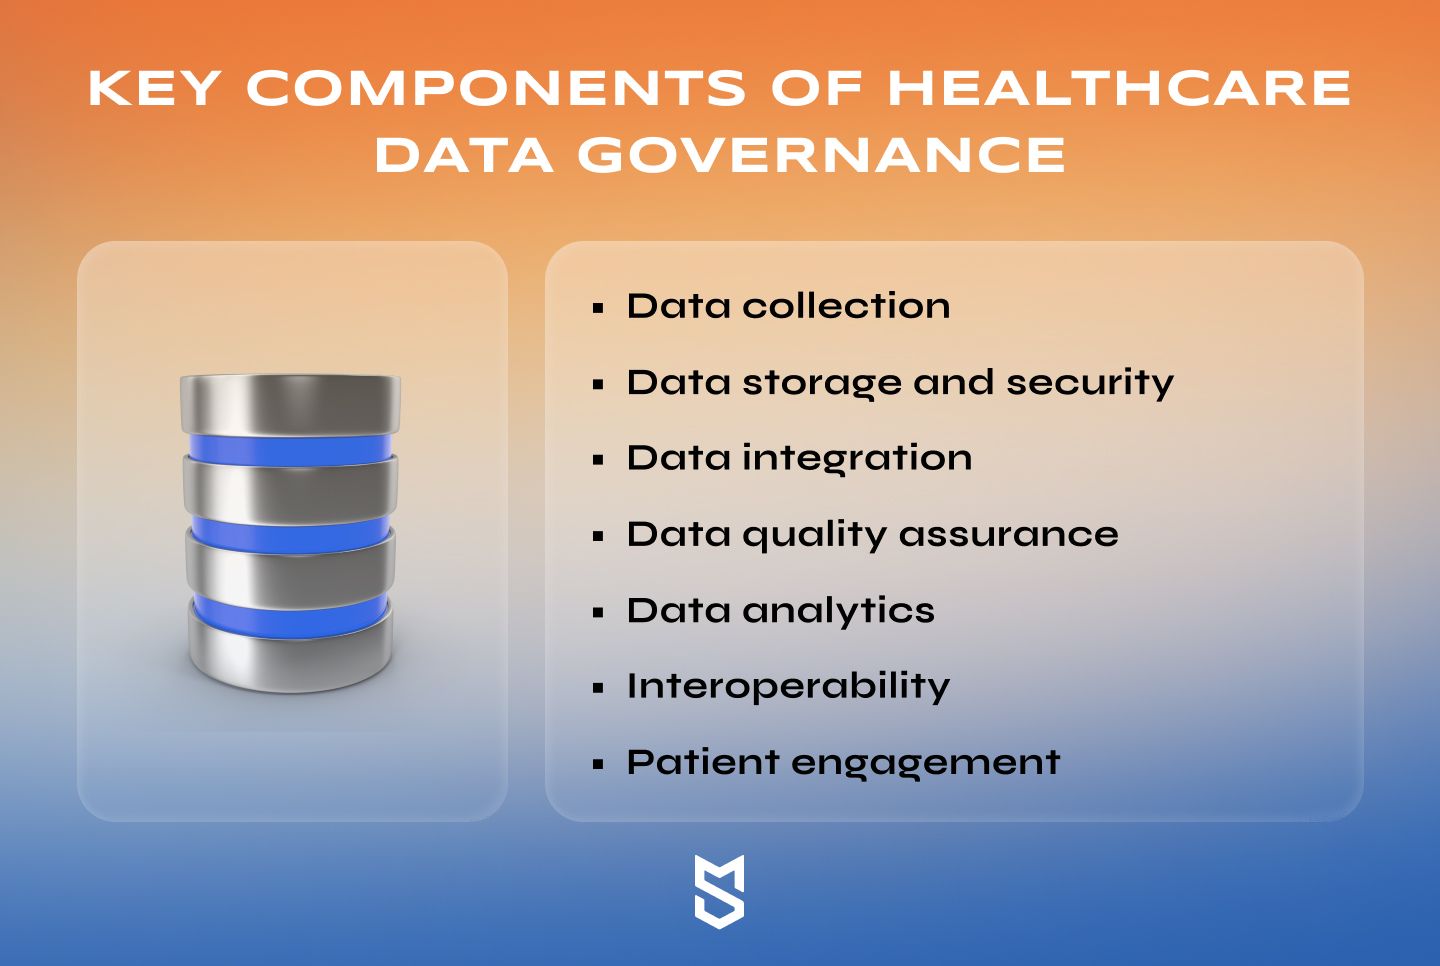 Key components of healthcare data governance